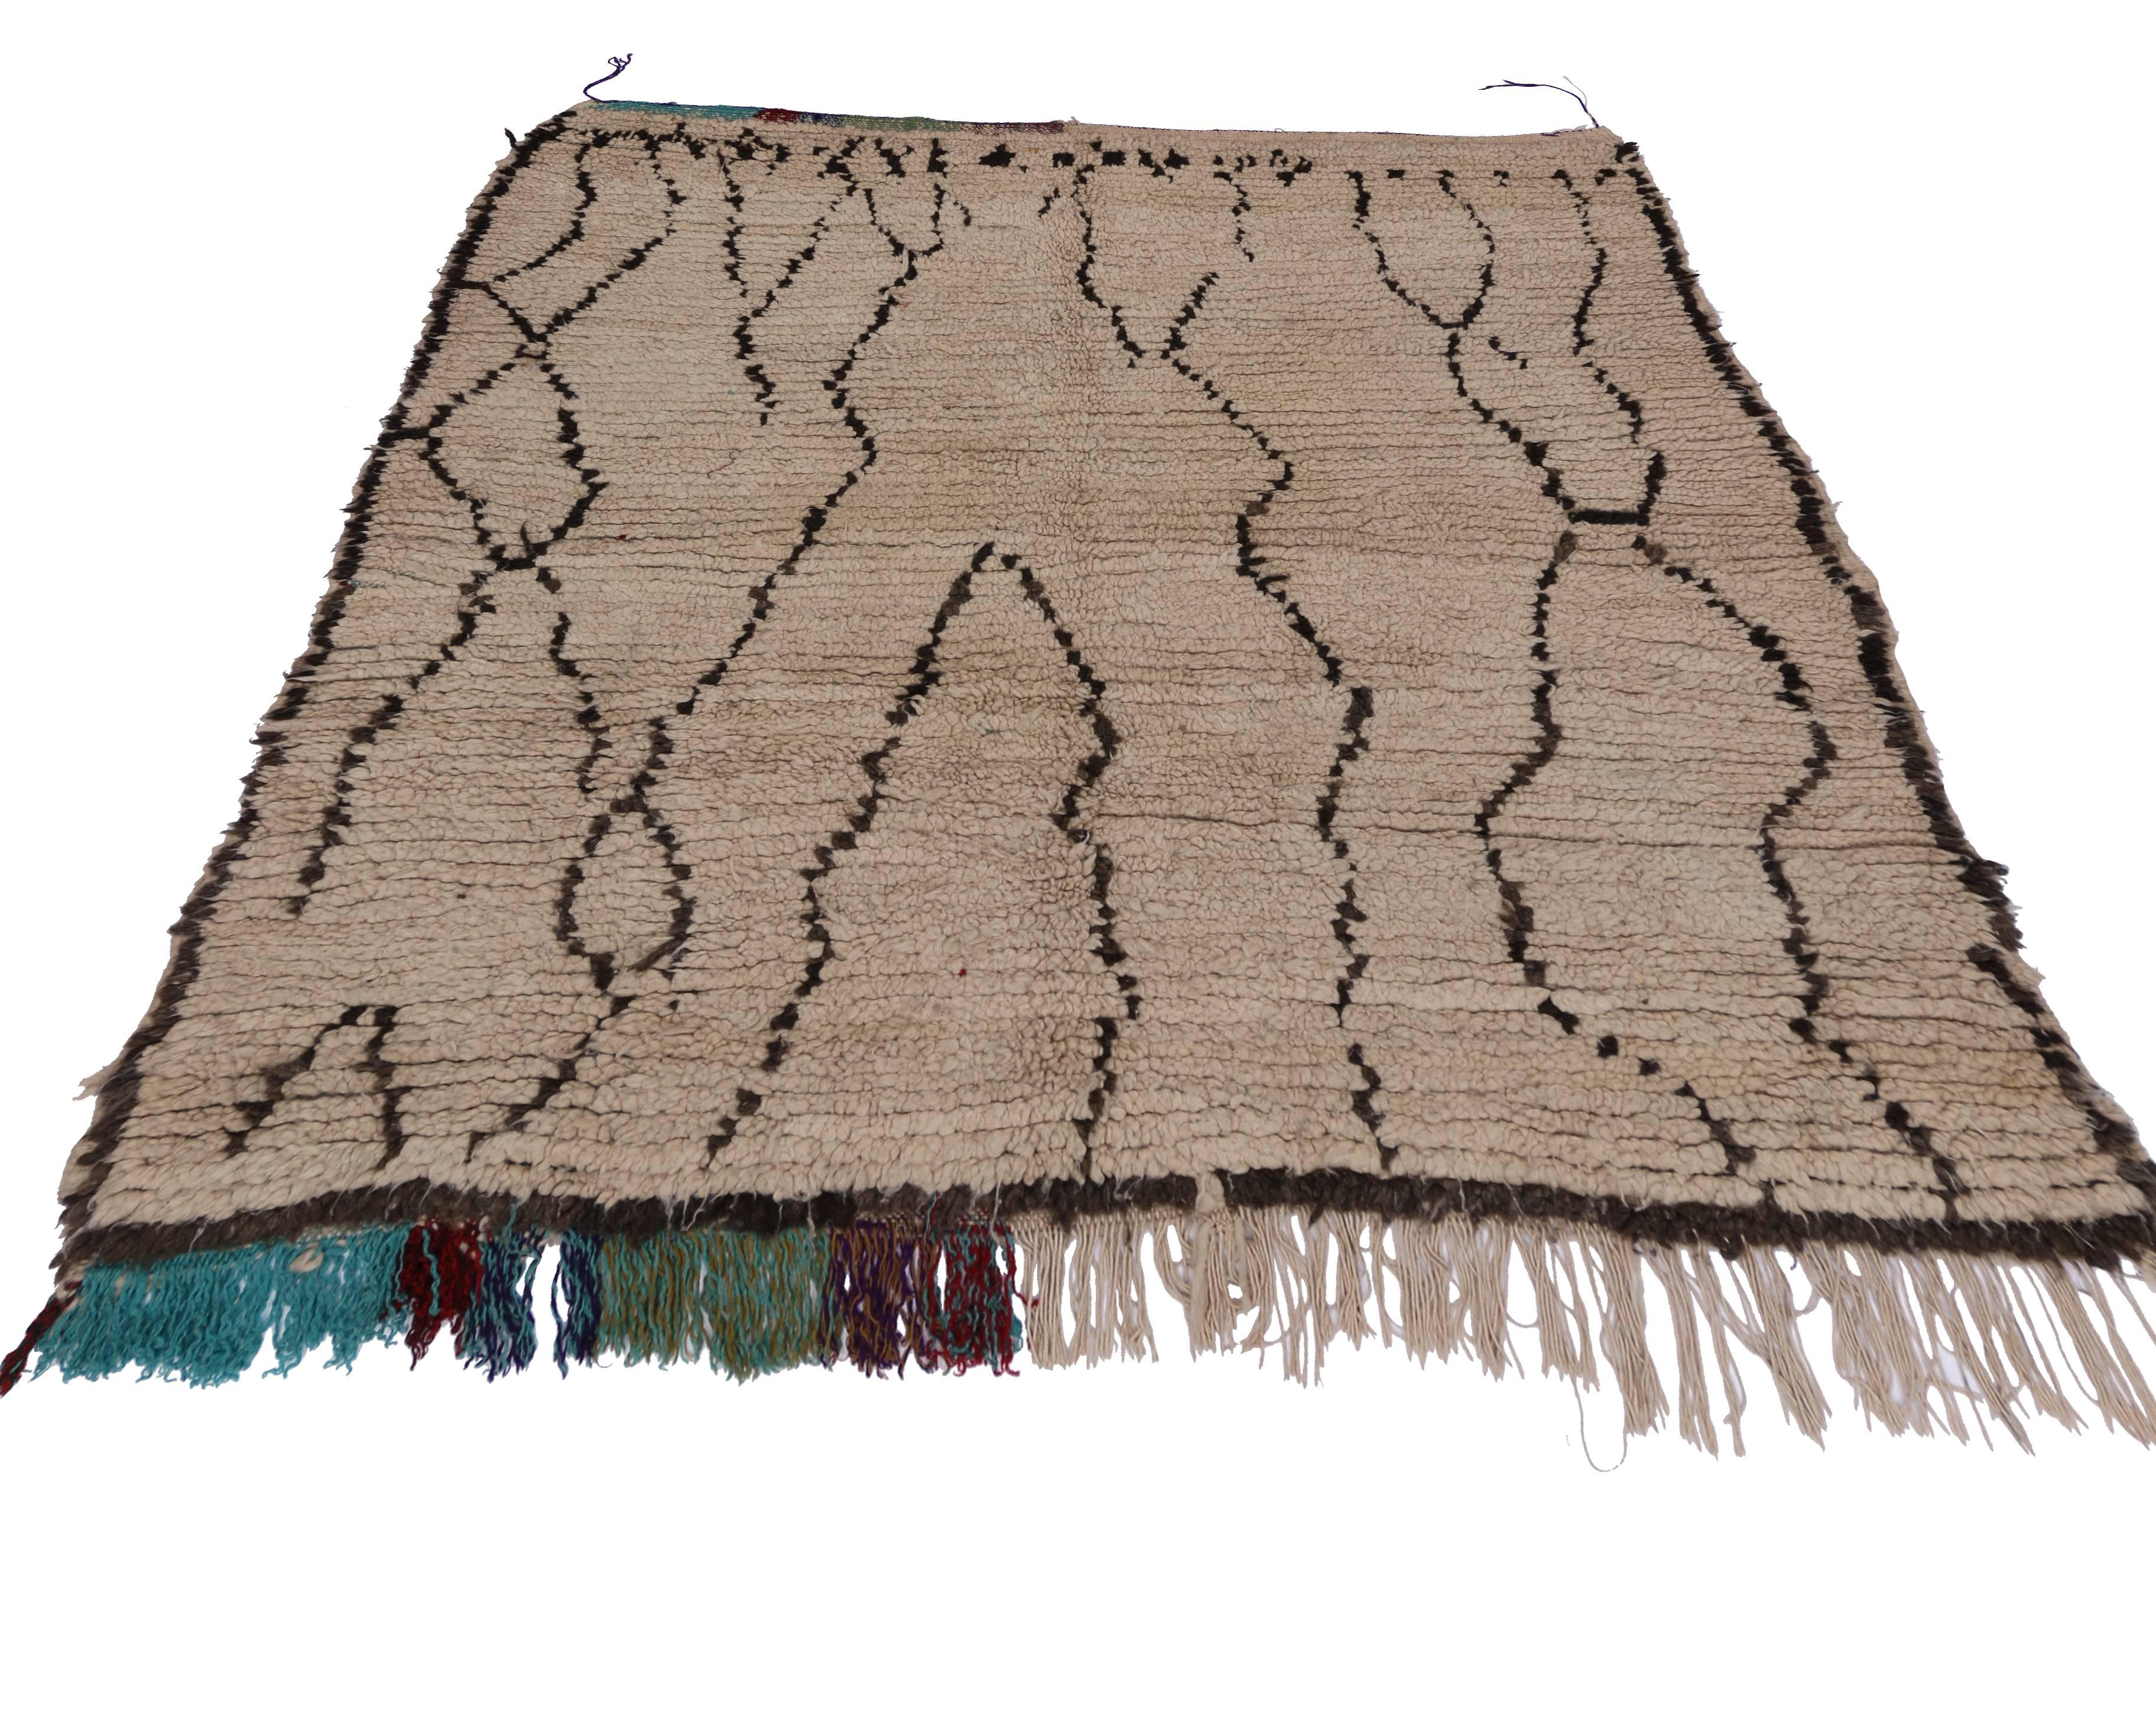 Berber Moroccan Rug with Minimalist Design and Mid-Century Modern Style 3